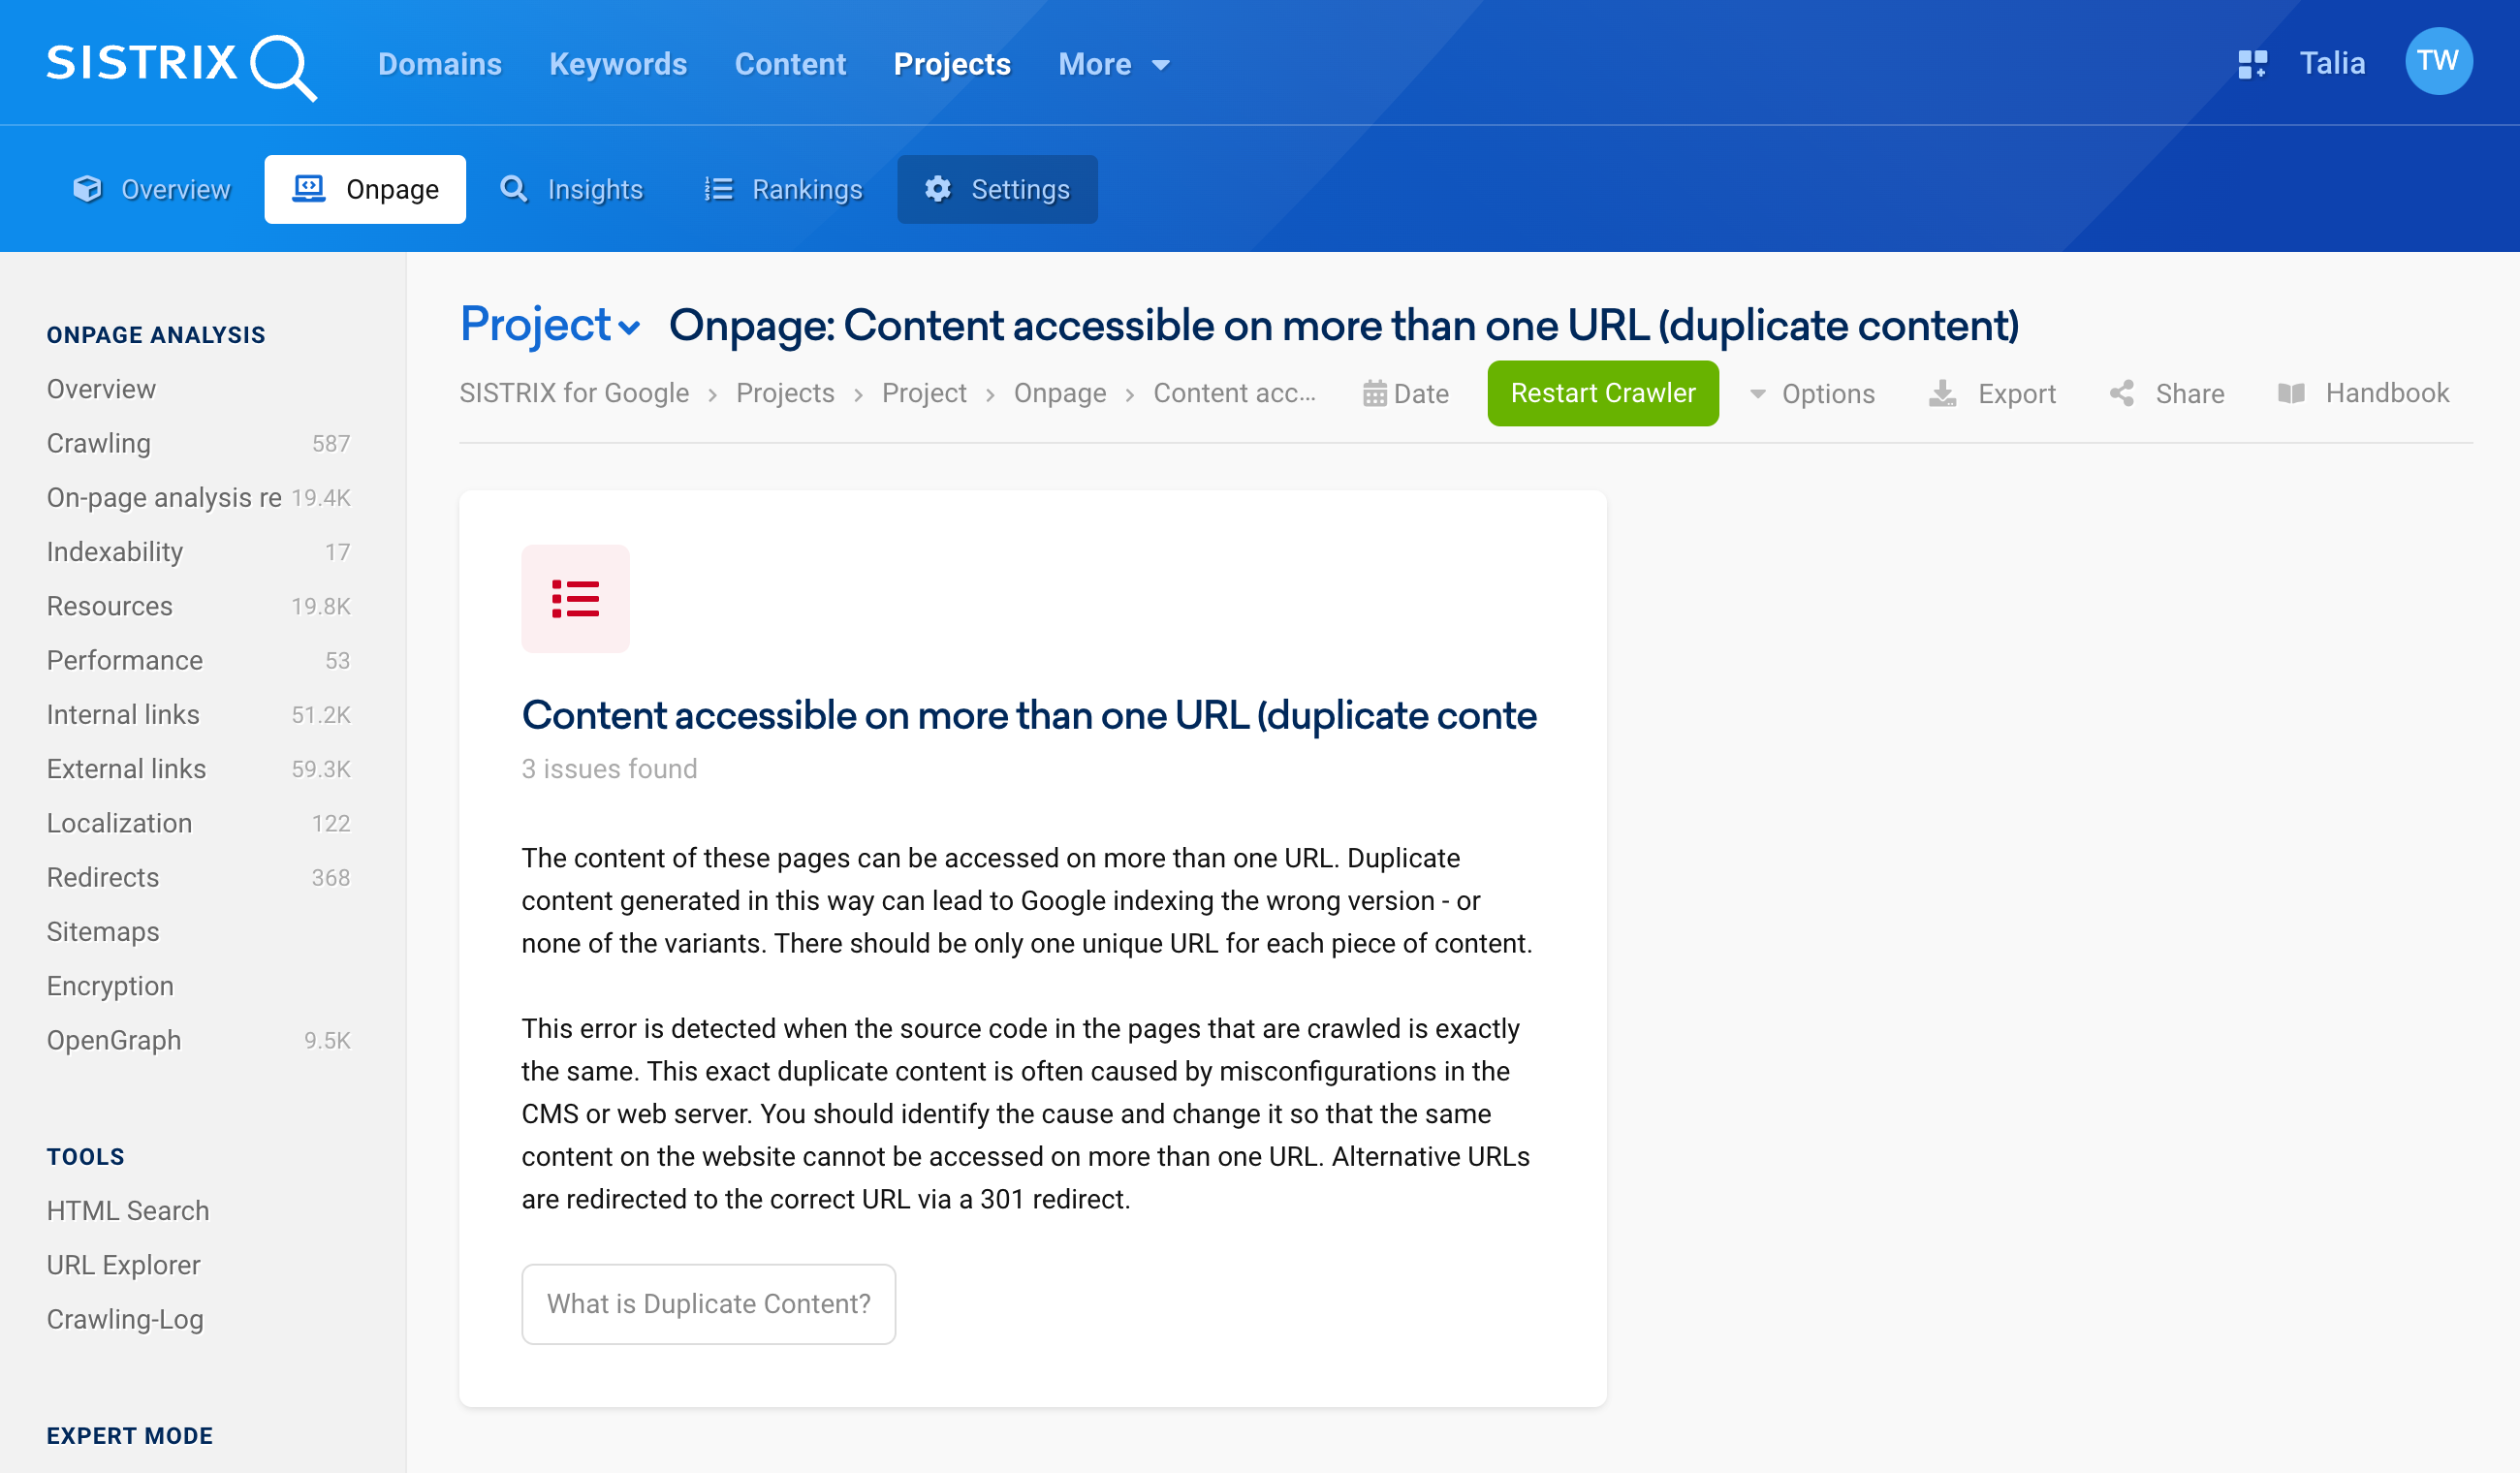 The SISTRIX Onpage project displays the error "Duplicate content".